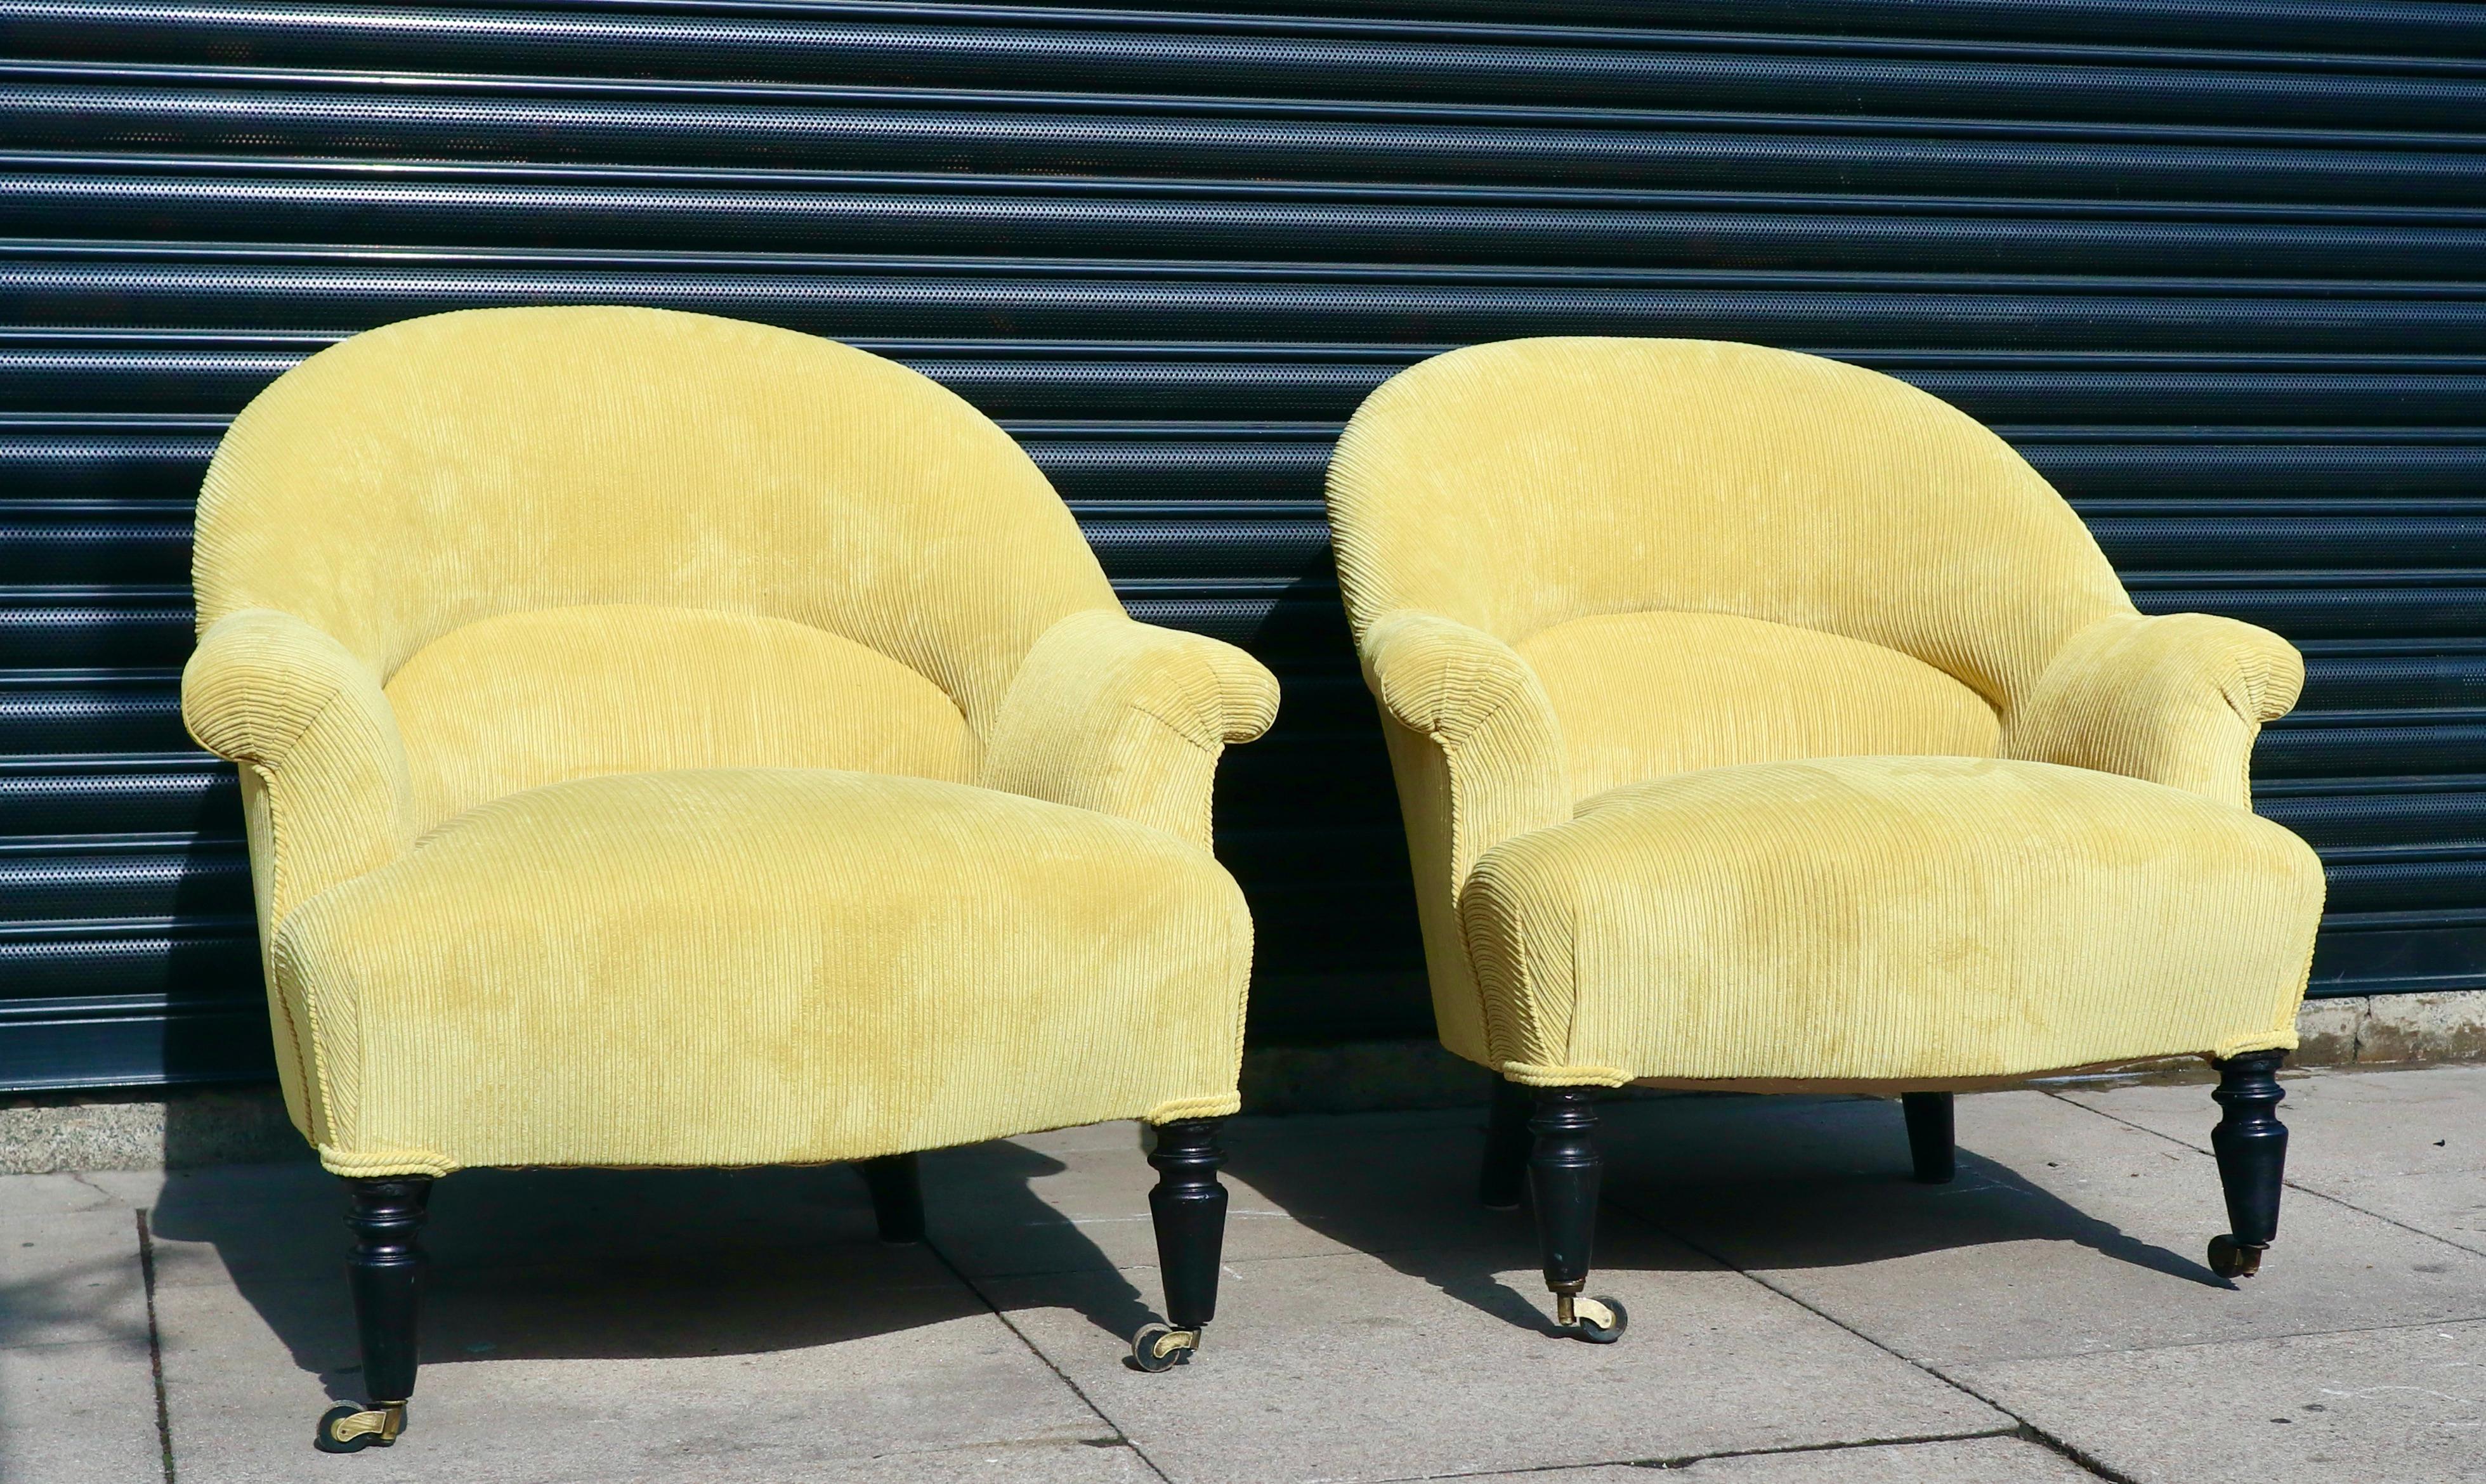  Pair of French 19th century Napoleon III crapaud armchairs in corduroy textile  For Sale 6